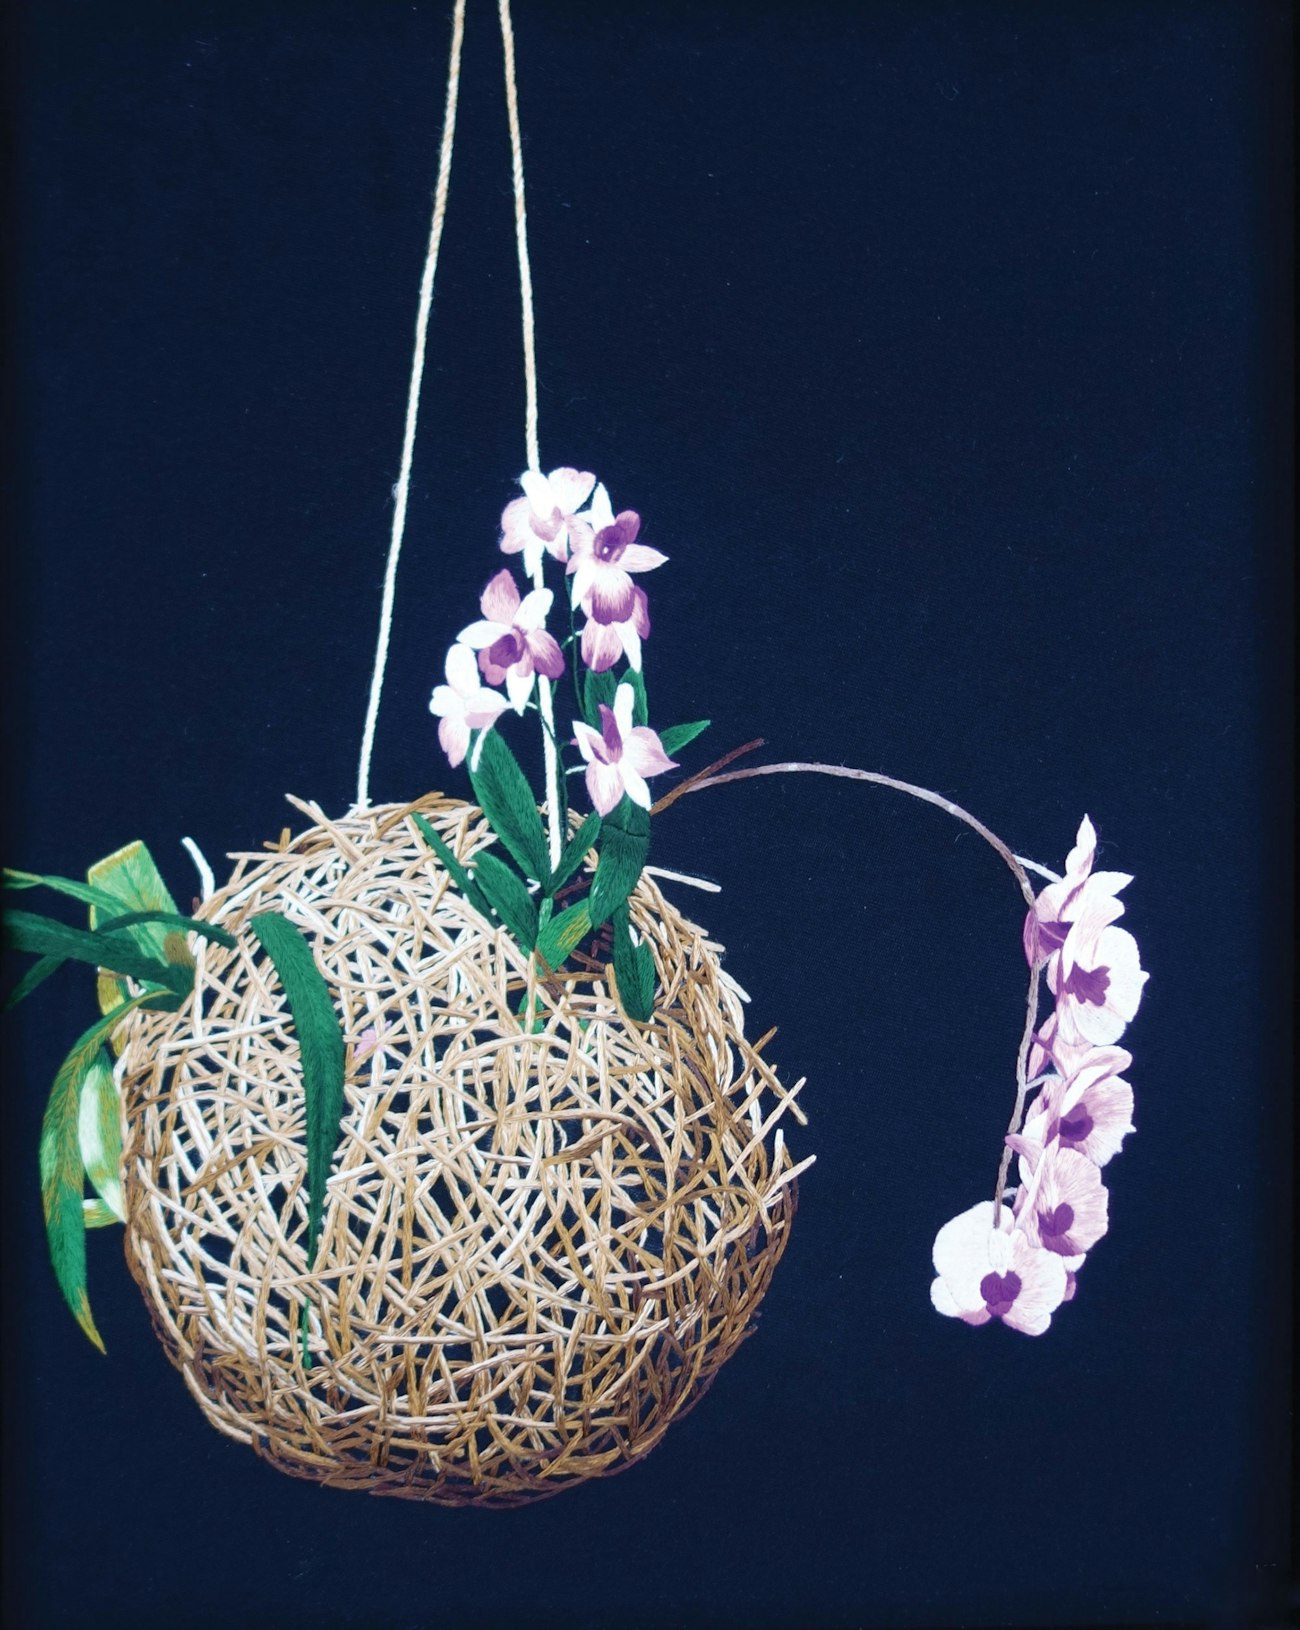 02-Orchid-with-Roots-2-res